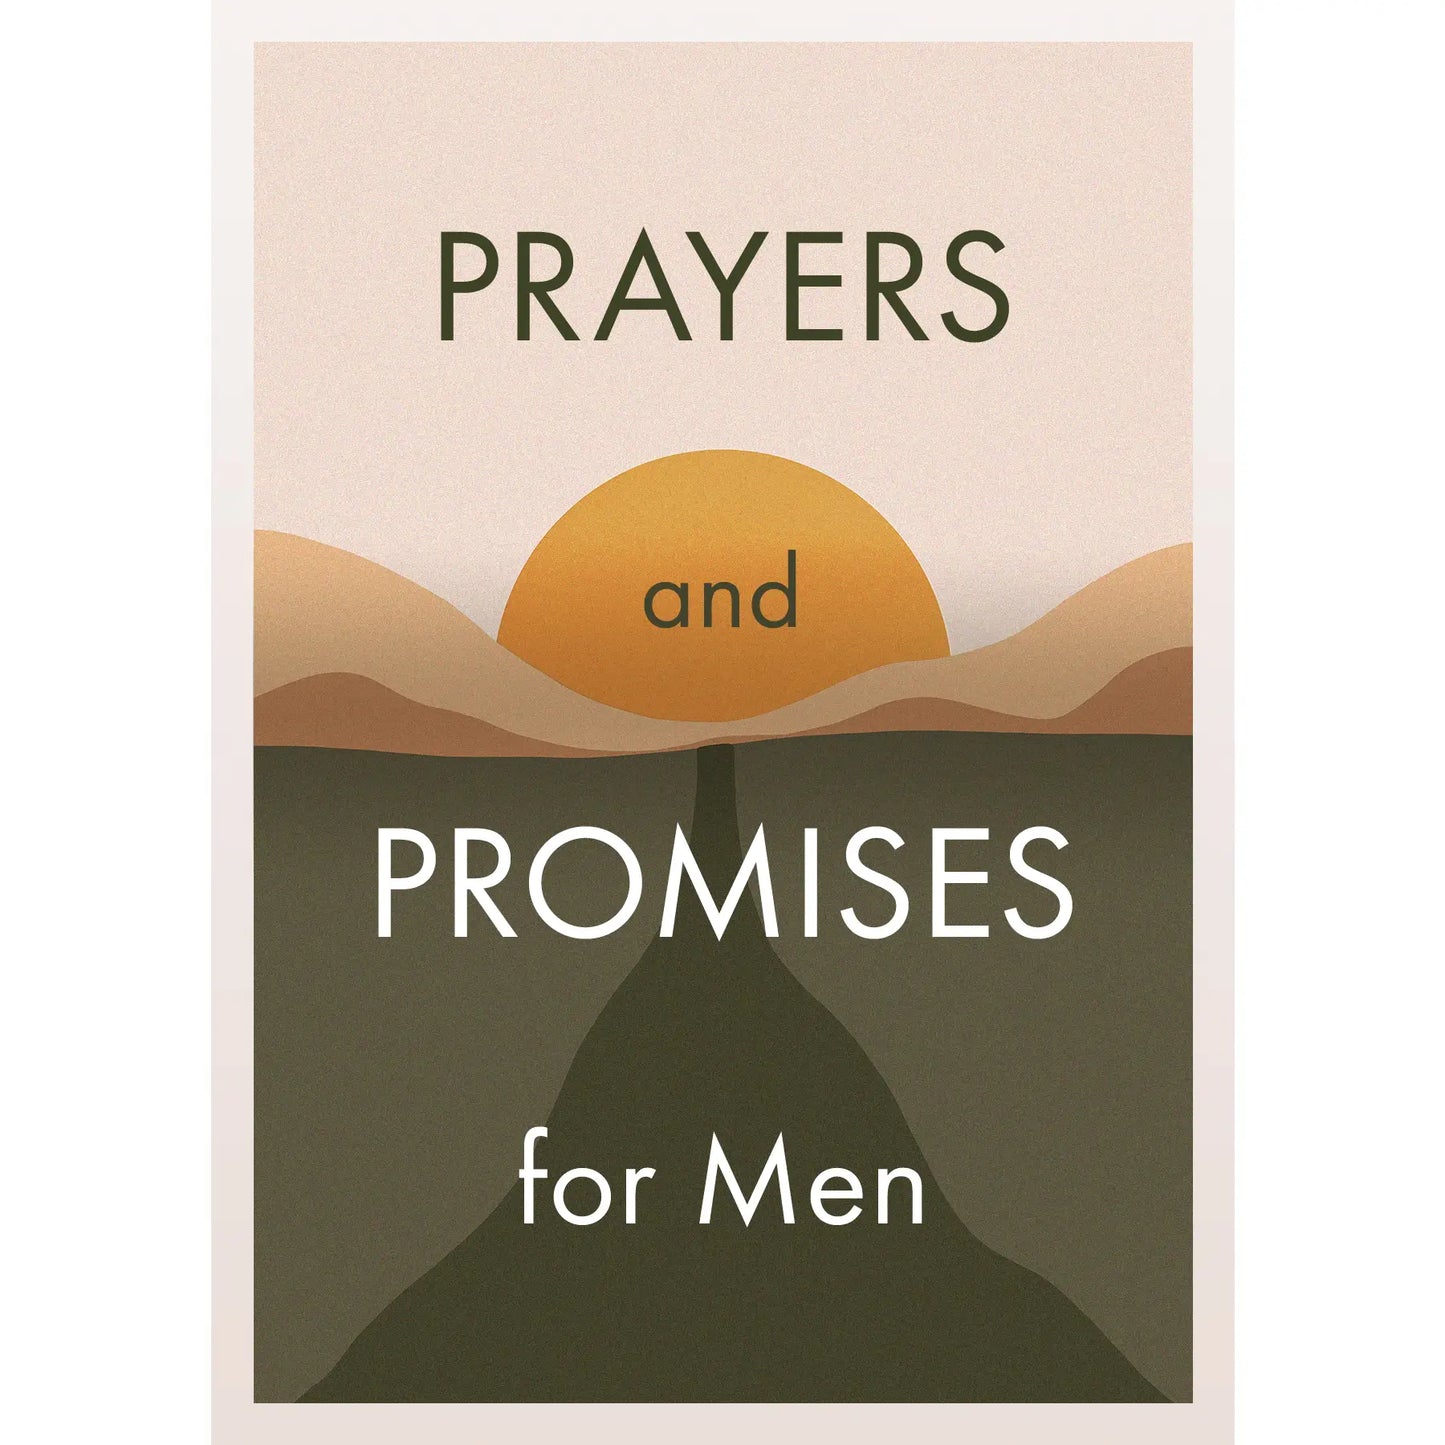 Prayers and promises for men